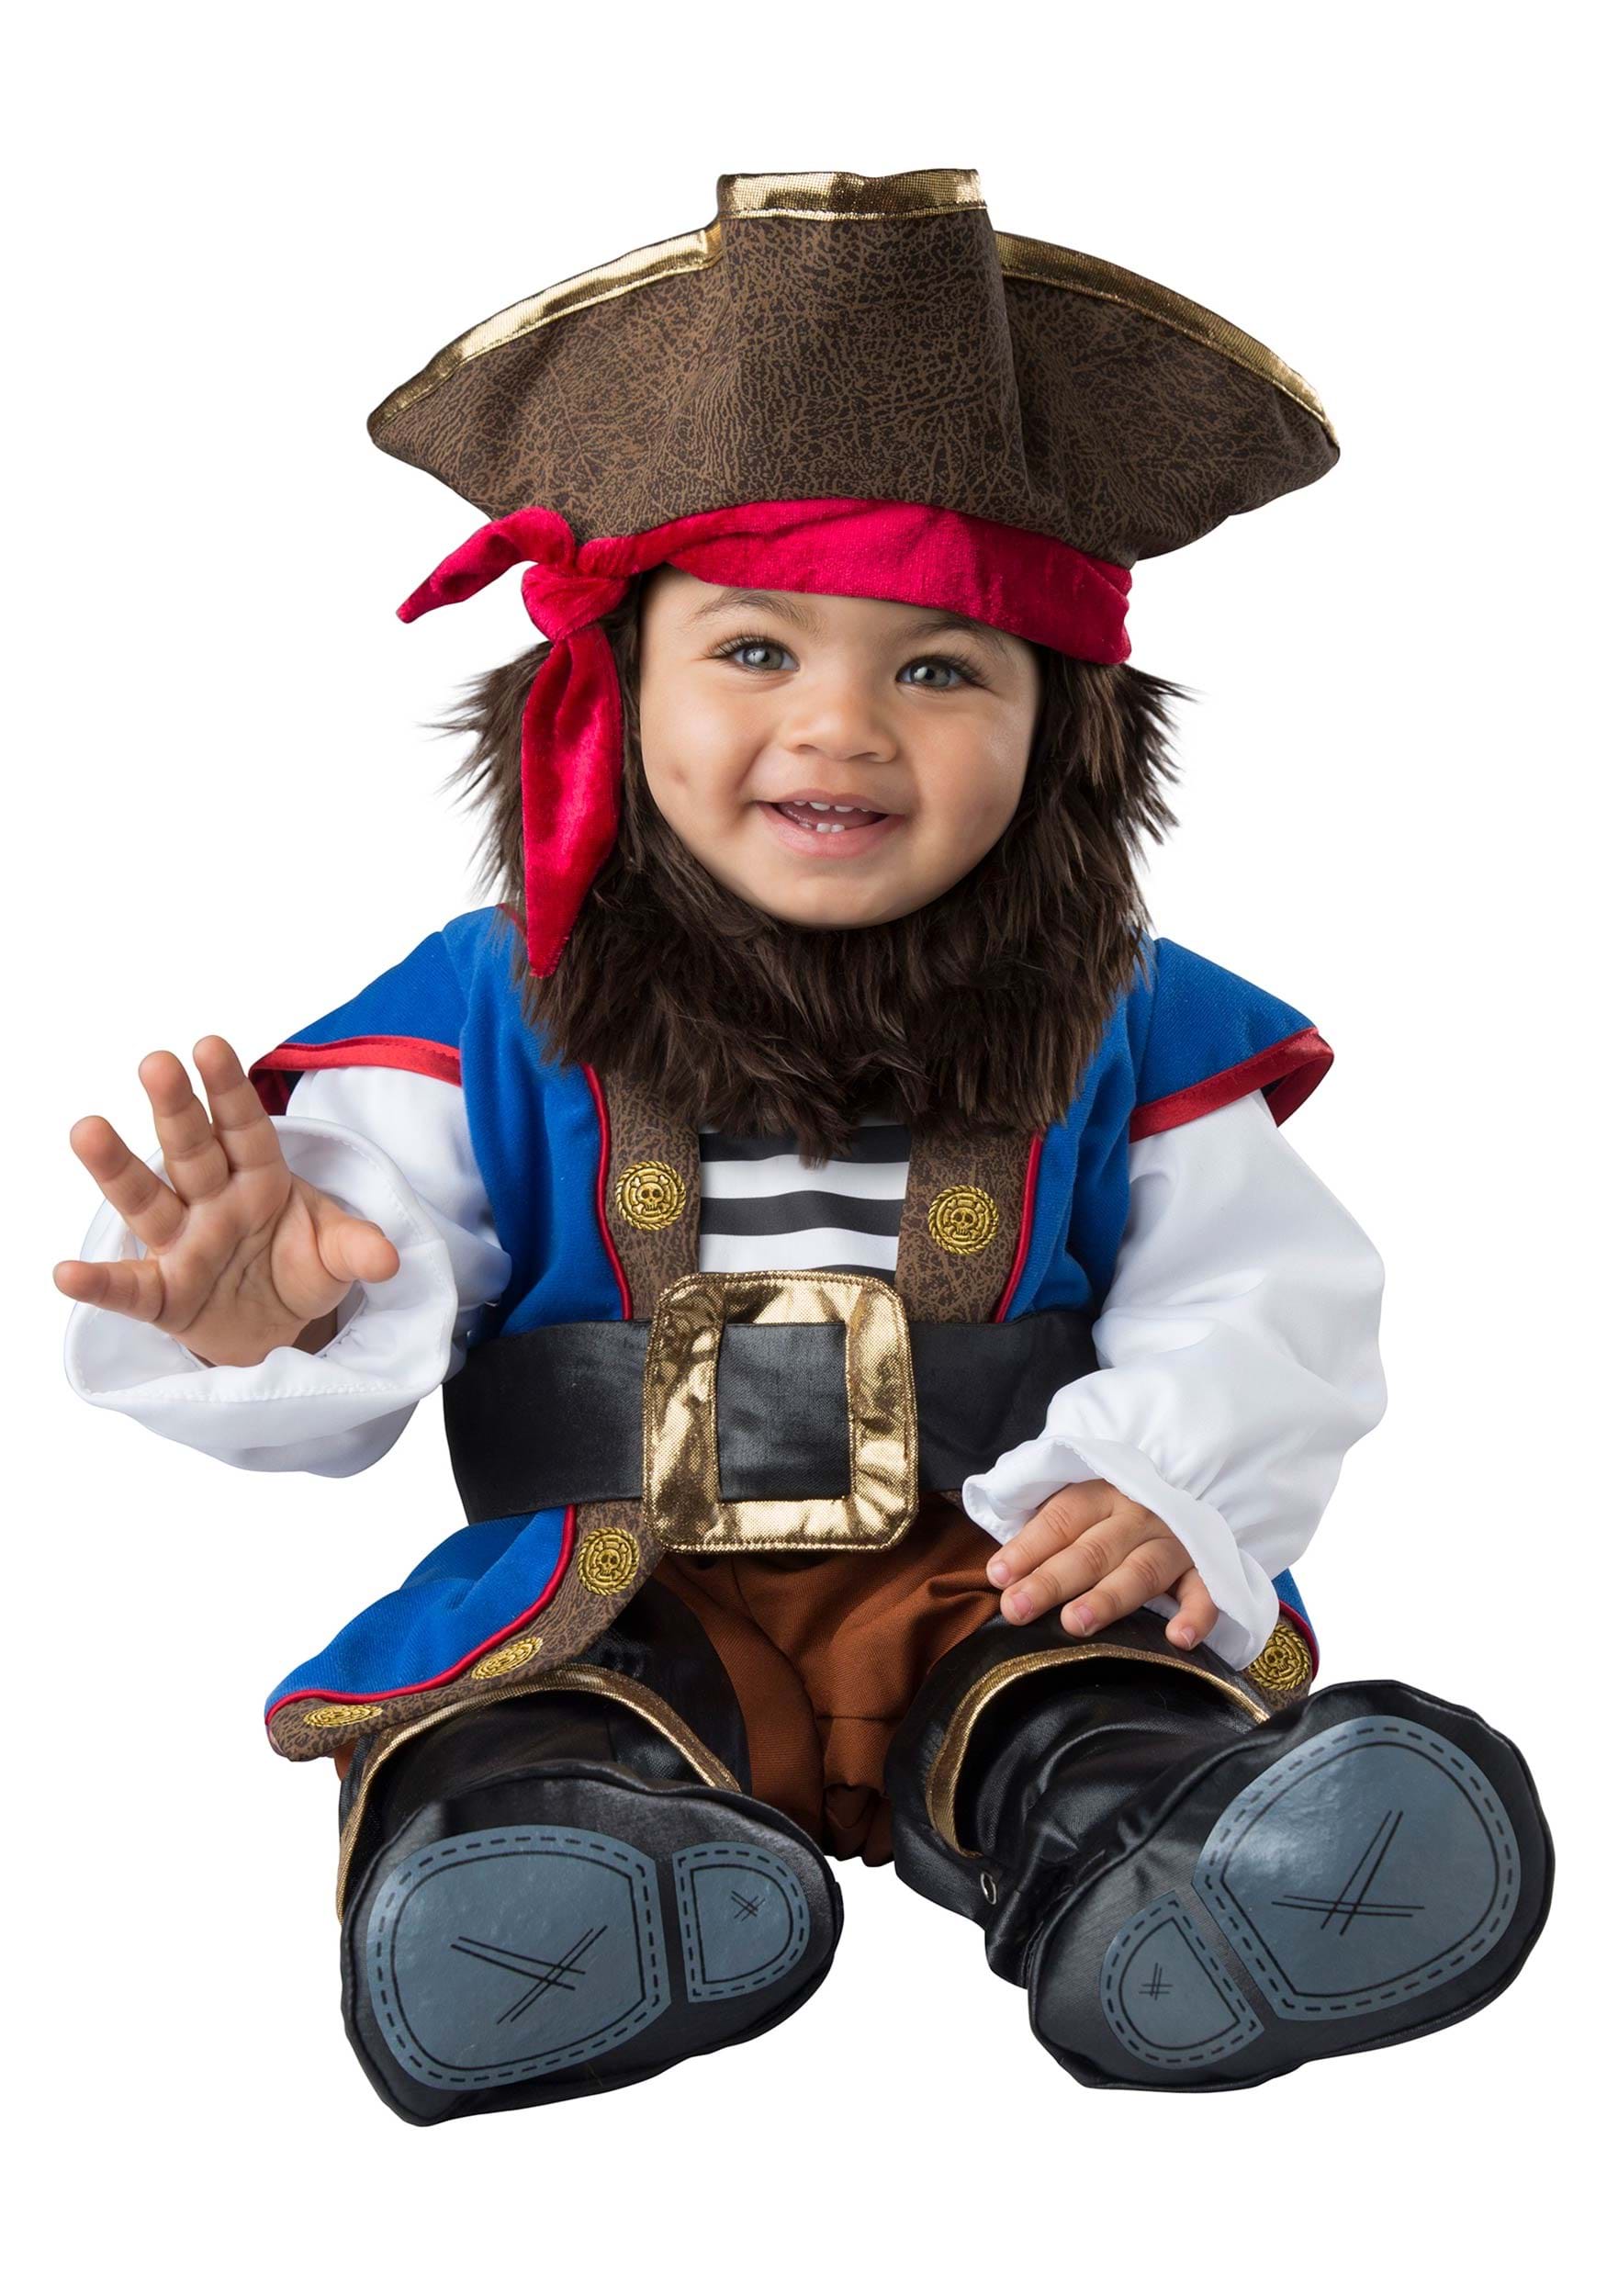 Photos - Fancy Dress Fun World Lil' Swashbuckler Infant Pirate Costume Blue/Brown/Red I